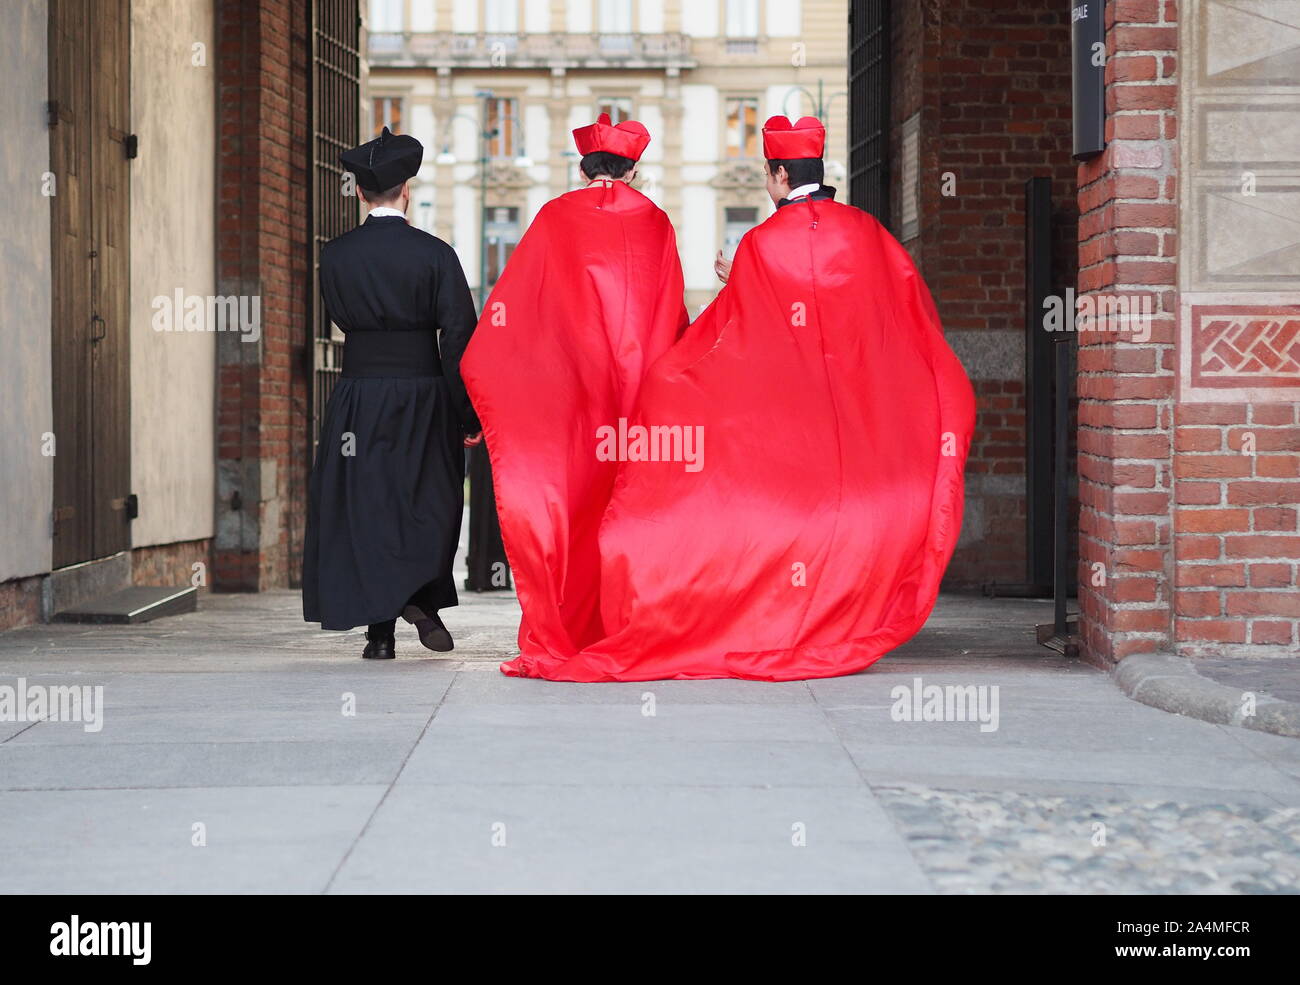 People in carnival outifts posing and walking for photographers in Milan during carnival parade. Stock Photo